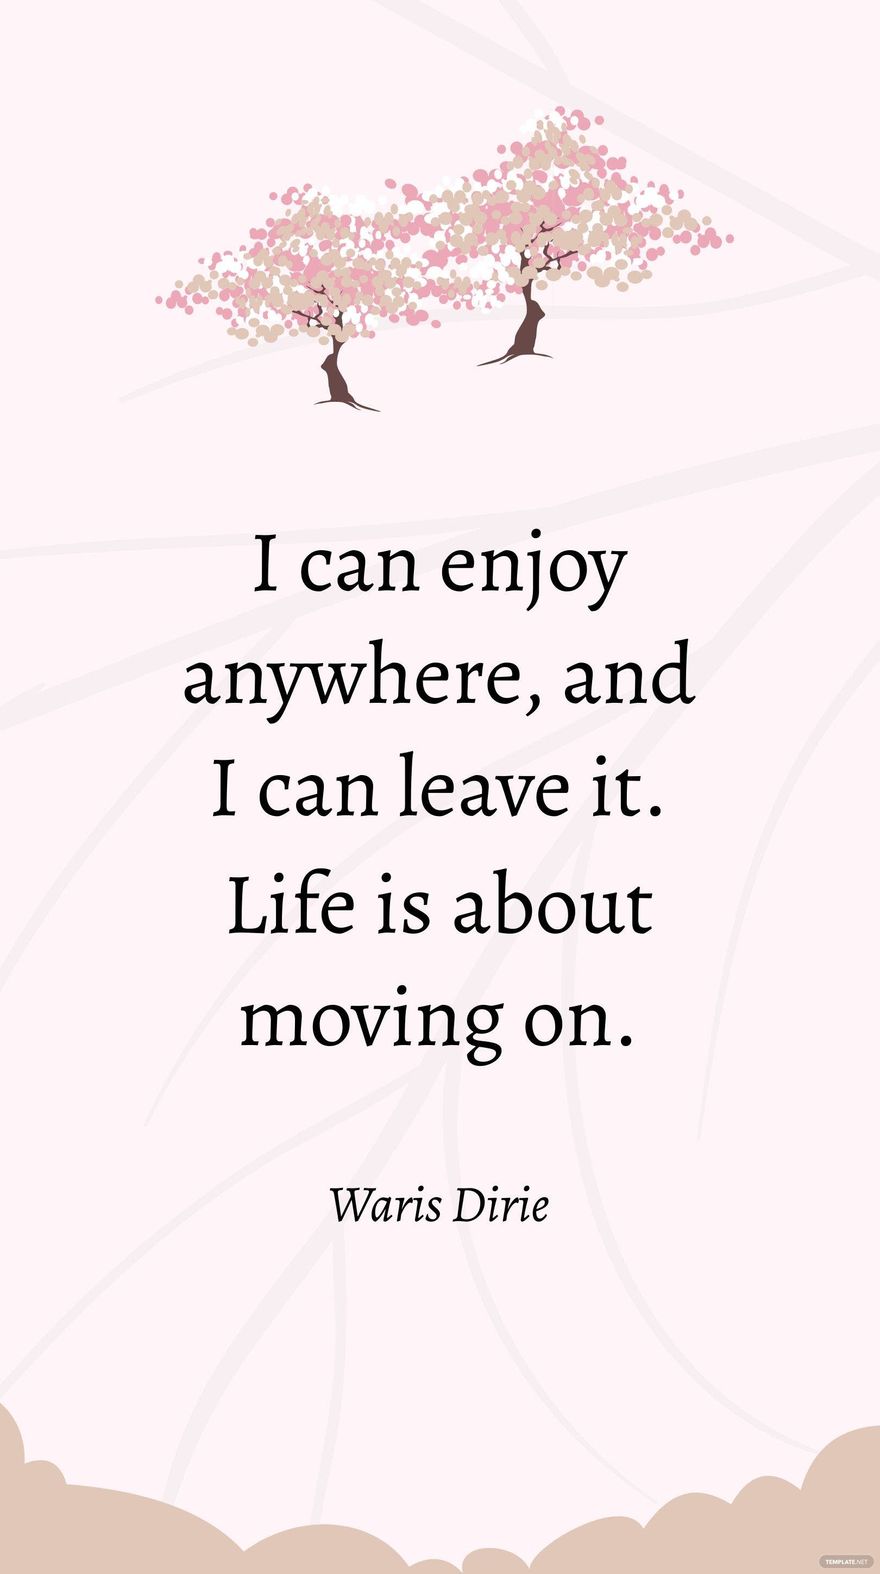 Free Waris Dirie - I can enjoy anywhere, and I can leave it. Life is about moving on. in JPG